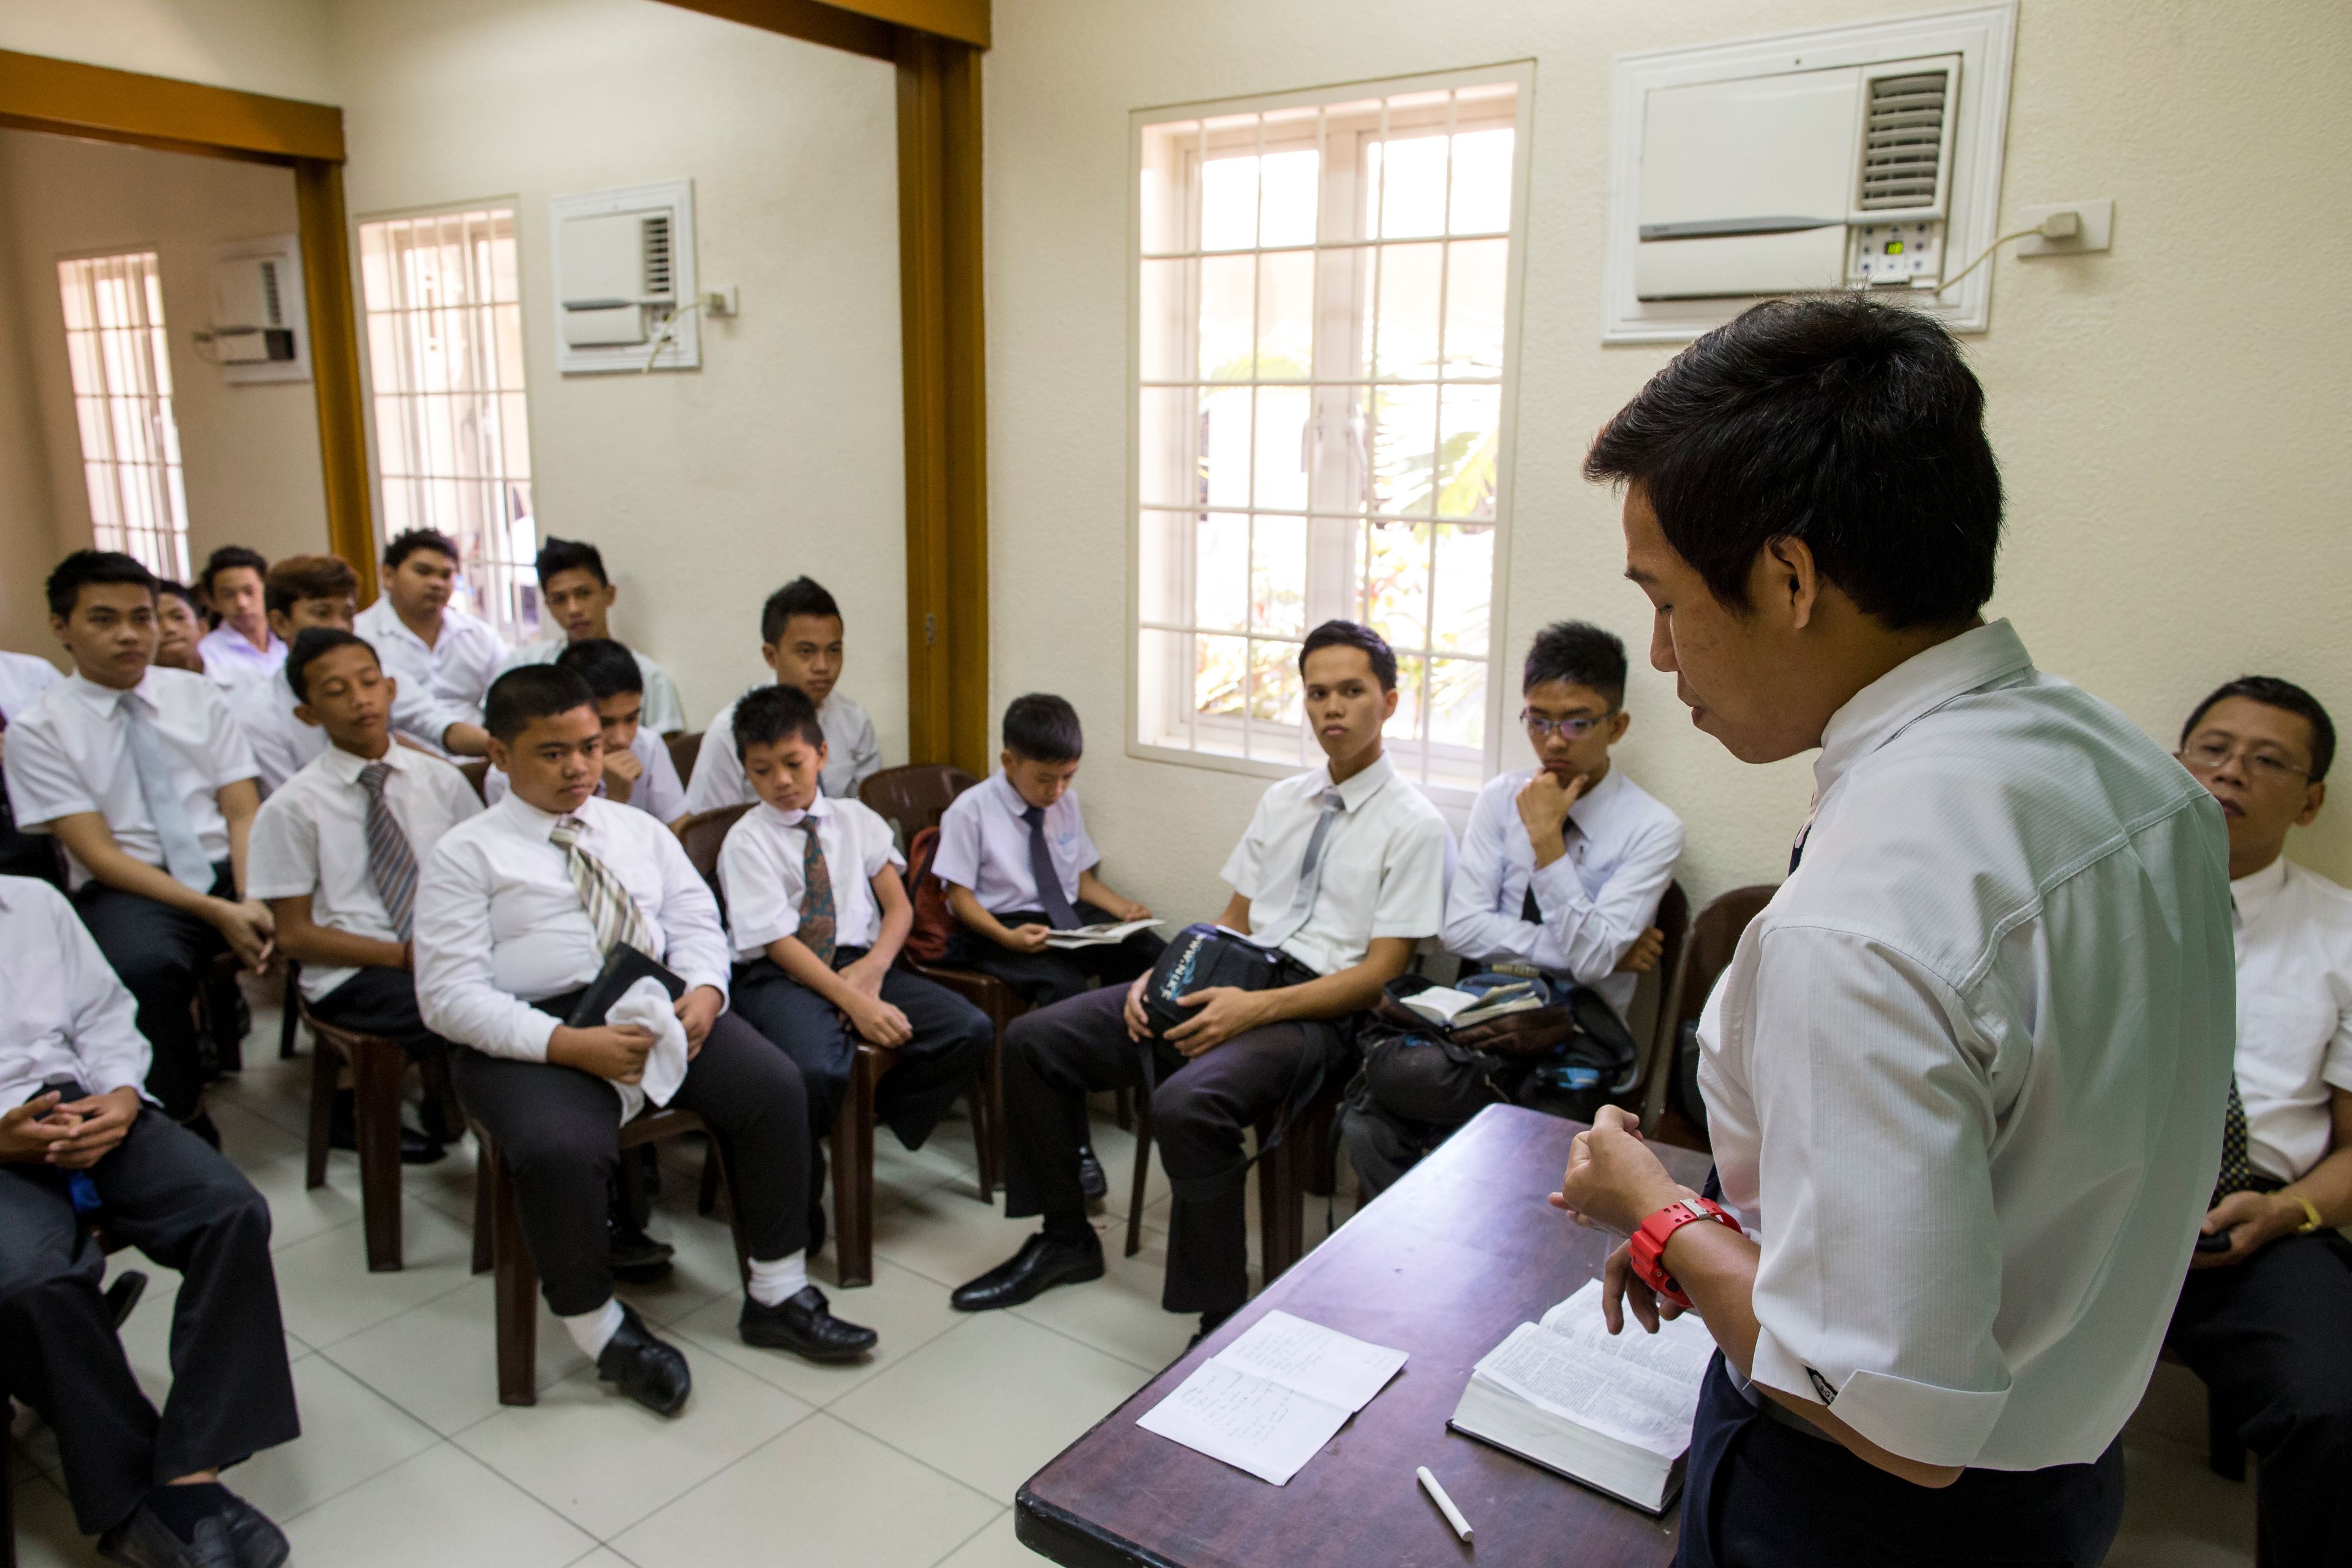 A young man stands to teach a classroom full of young men during a priesthood meeting.  